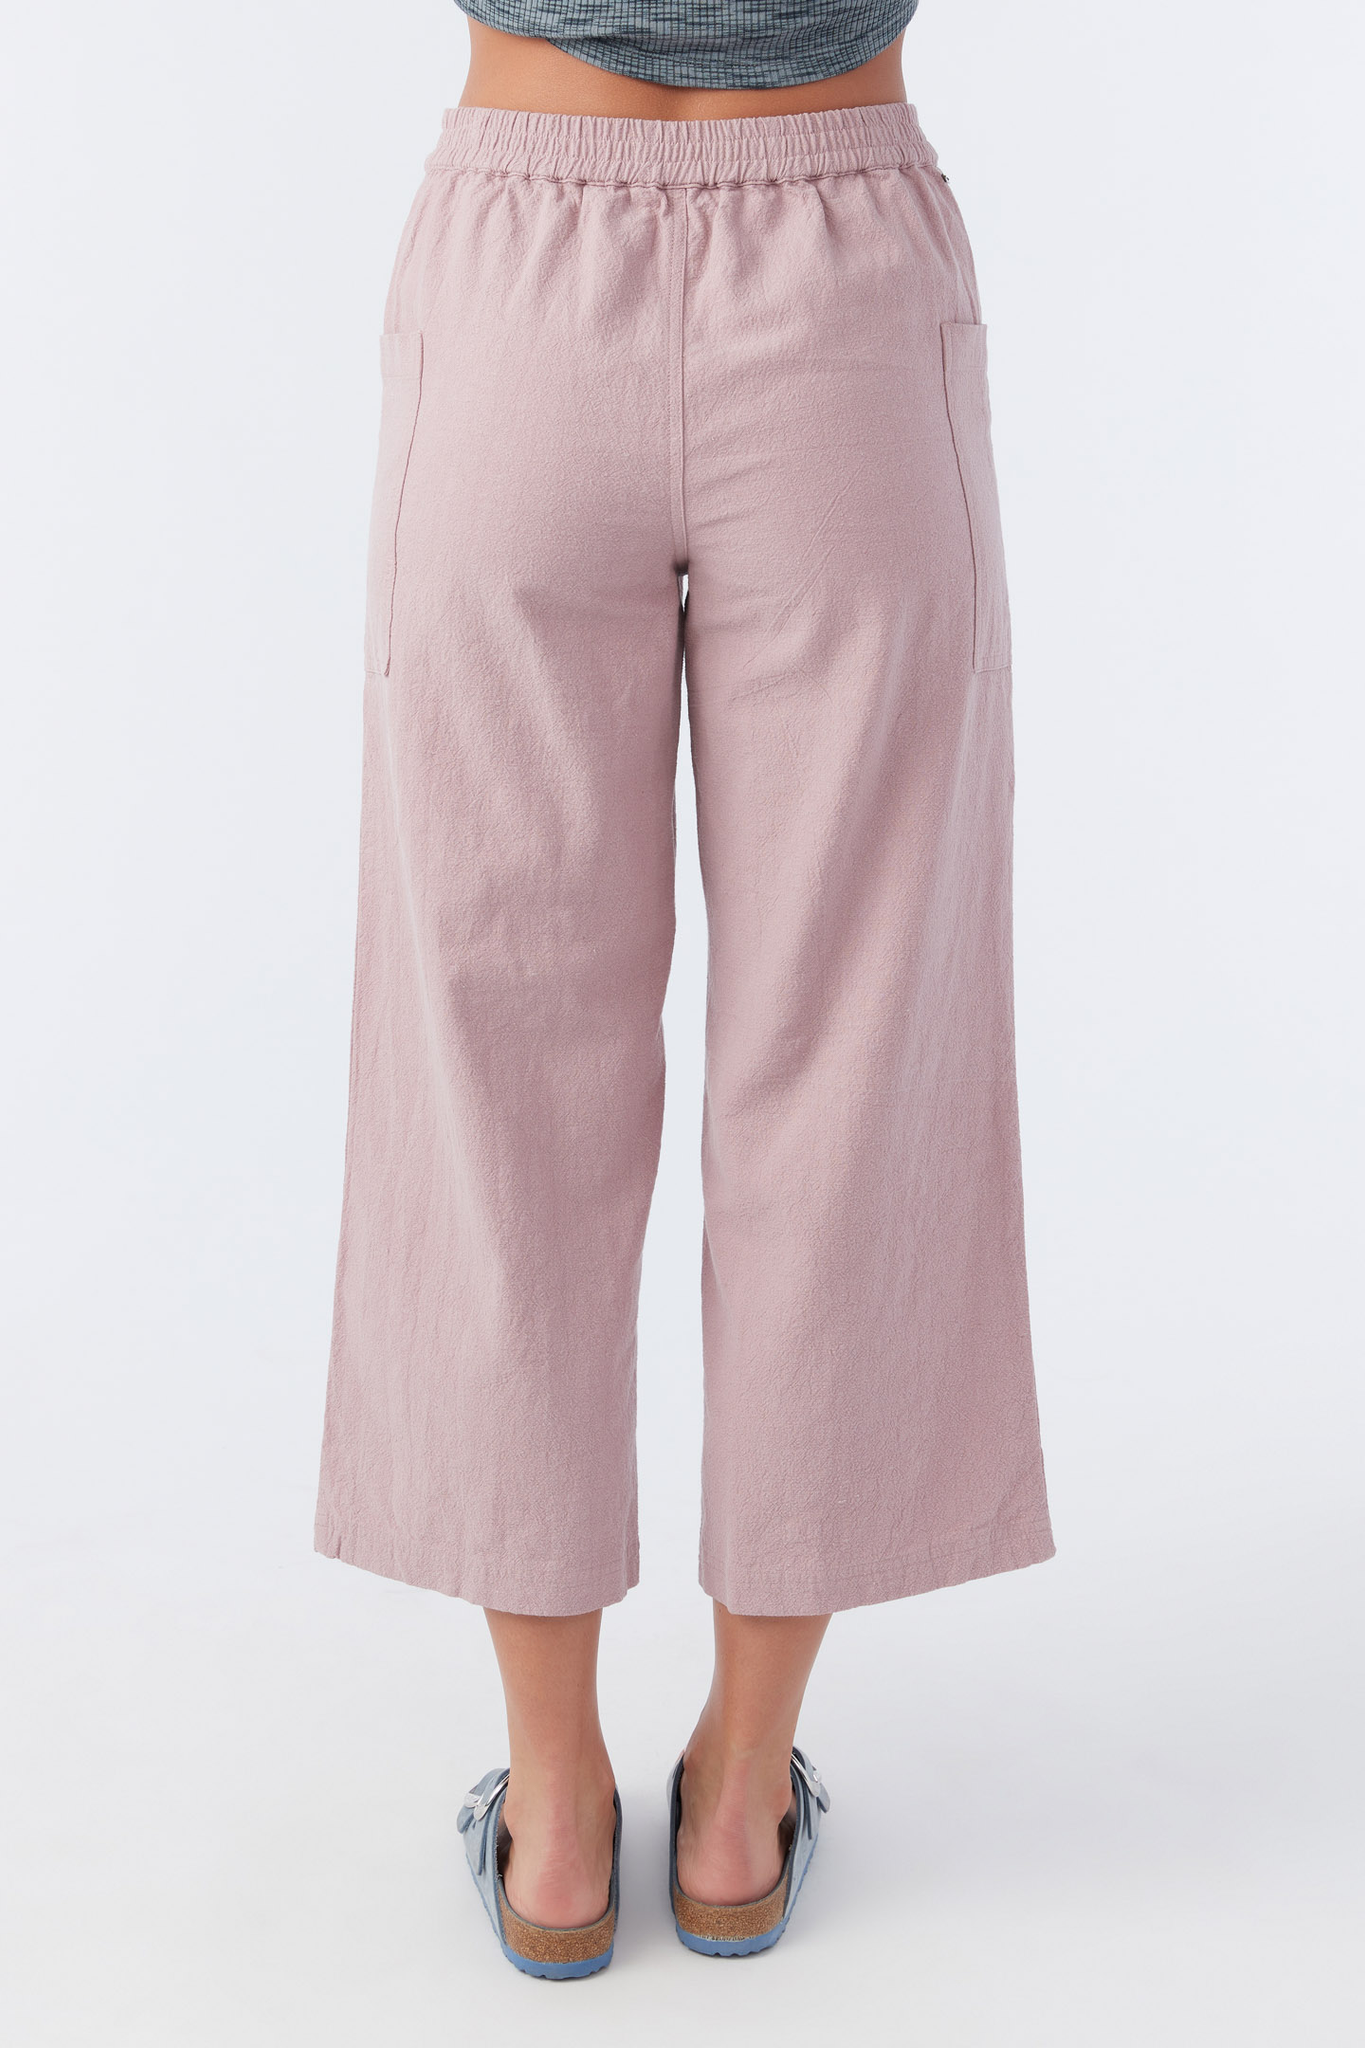 O'Neill PW Blessed Pantalones de Nieve, Mujer, Rosa Bridal, Large